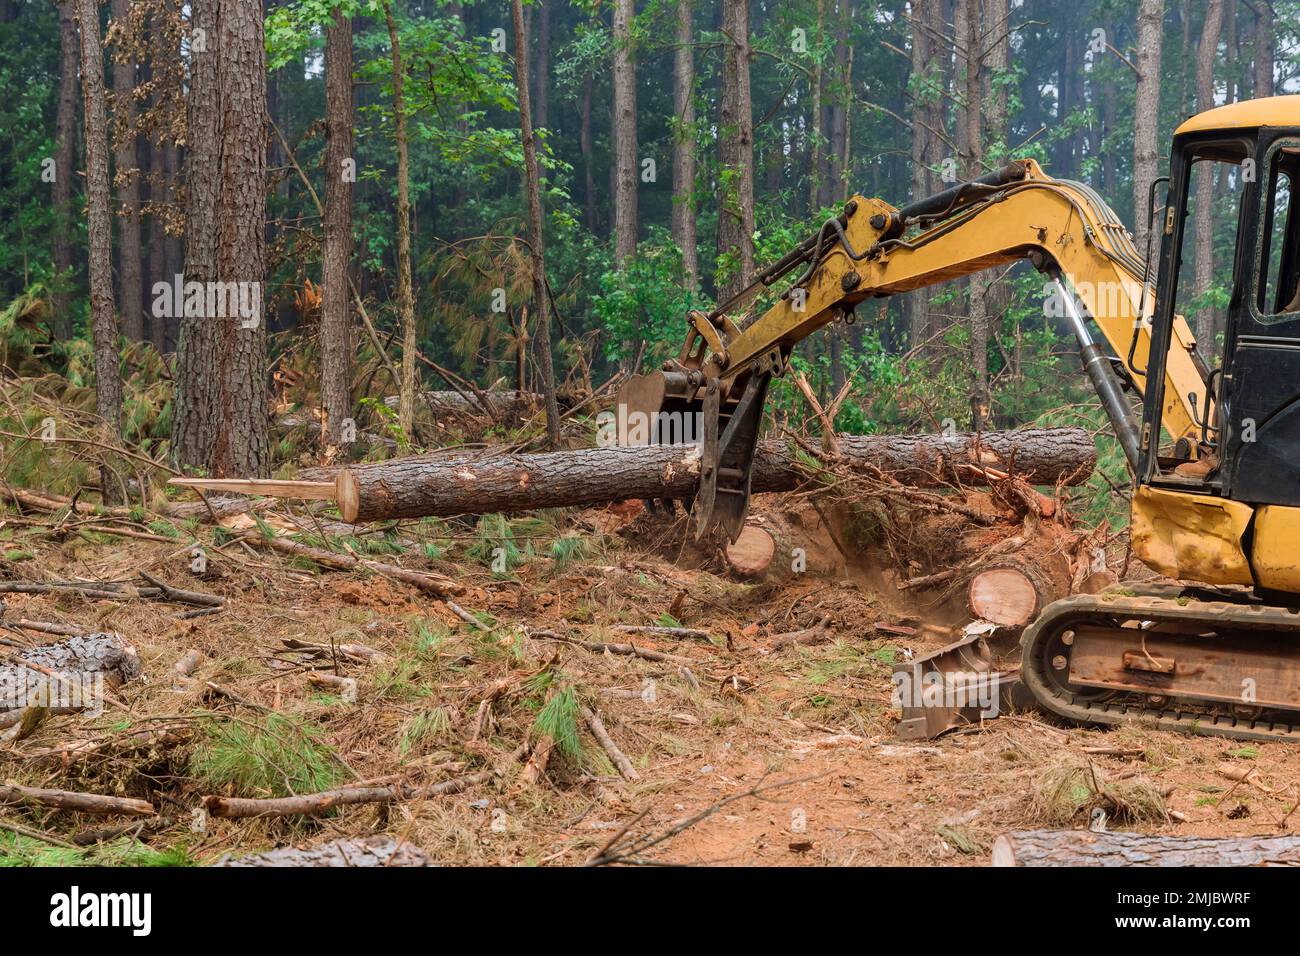 It is an uprooting trees using tractor manipulator then lifting logs to prepare land for construction of housing development. Stock Photo